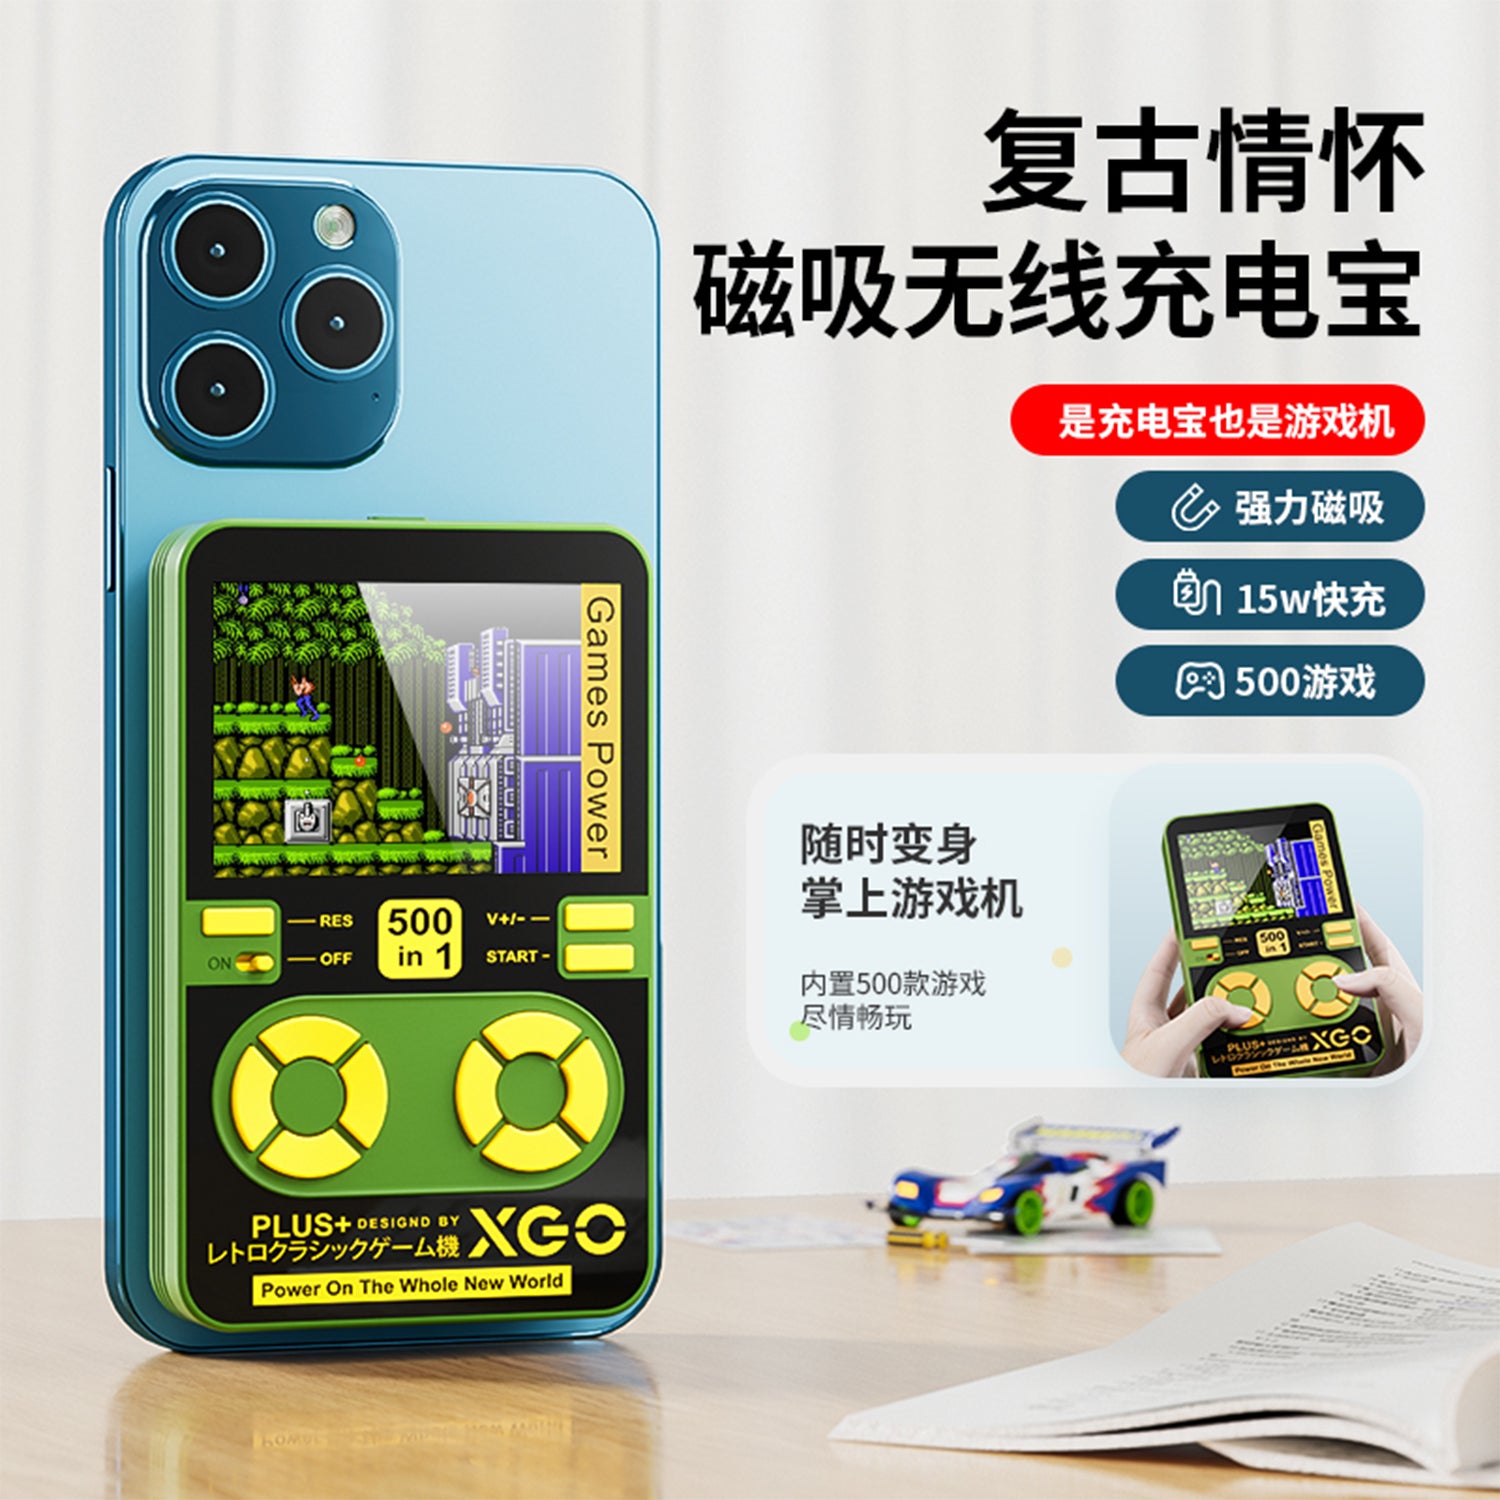 Multi-Functional Wireless Magnetic Power Bank With Mni Gaming Console, 5000mAh Fast Charging, Retro Handheld Game Player